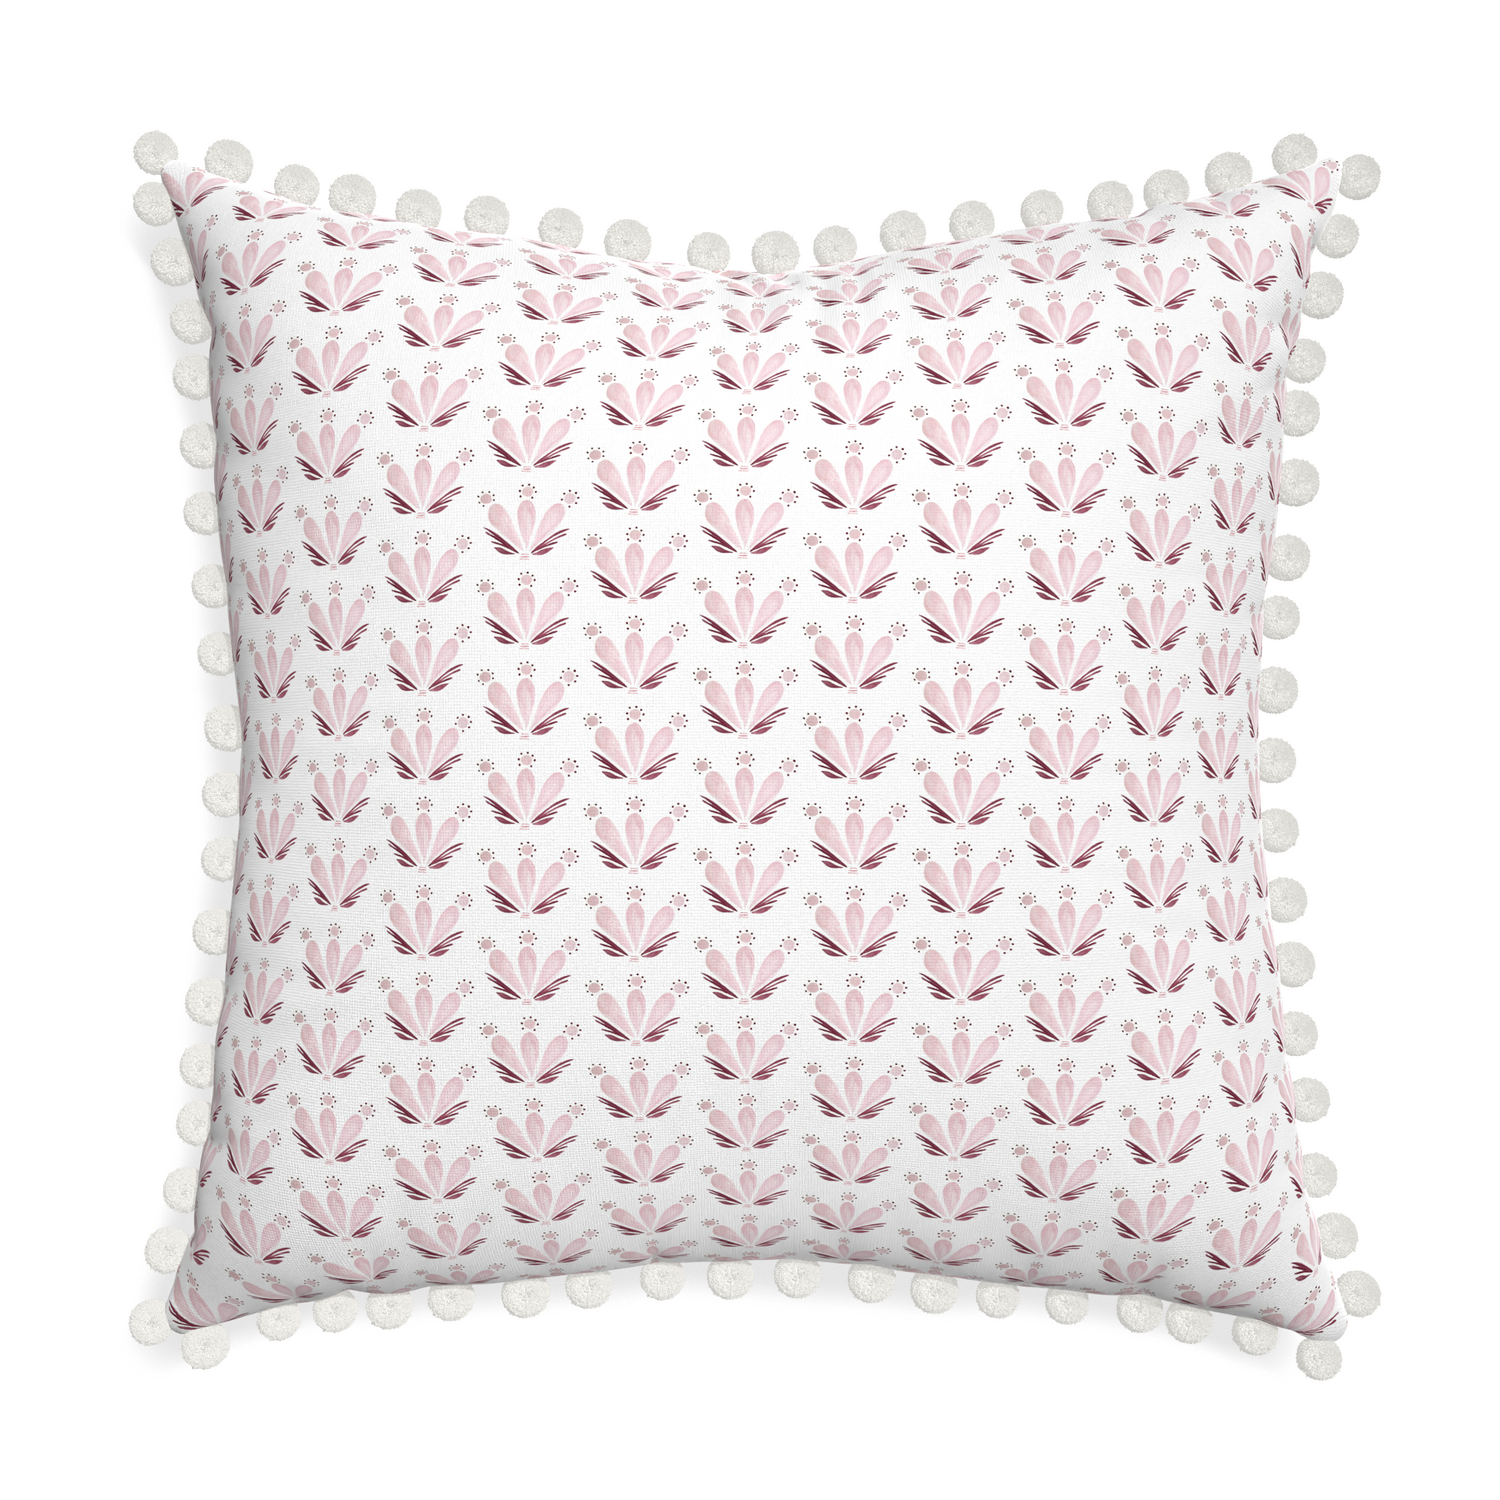 Euro-sham serena pink custom pink & burgundy drop repeat floralpillow with snow pom pom on white background